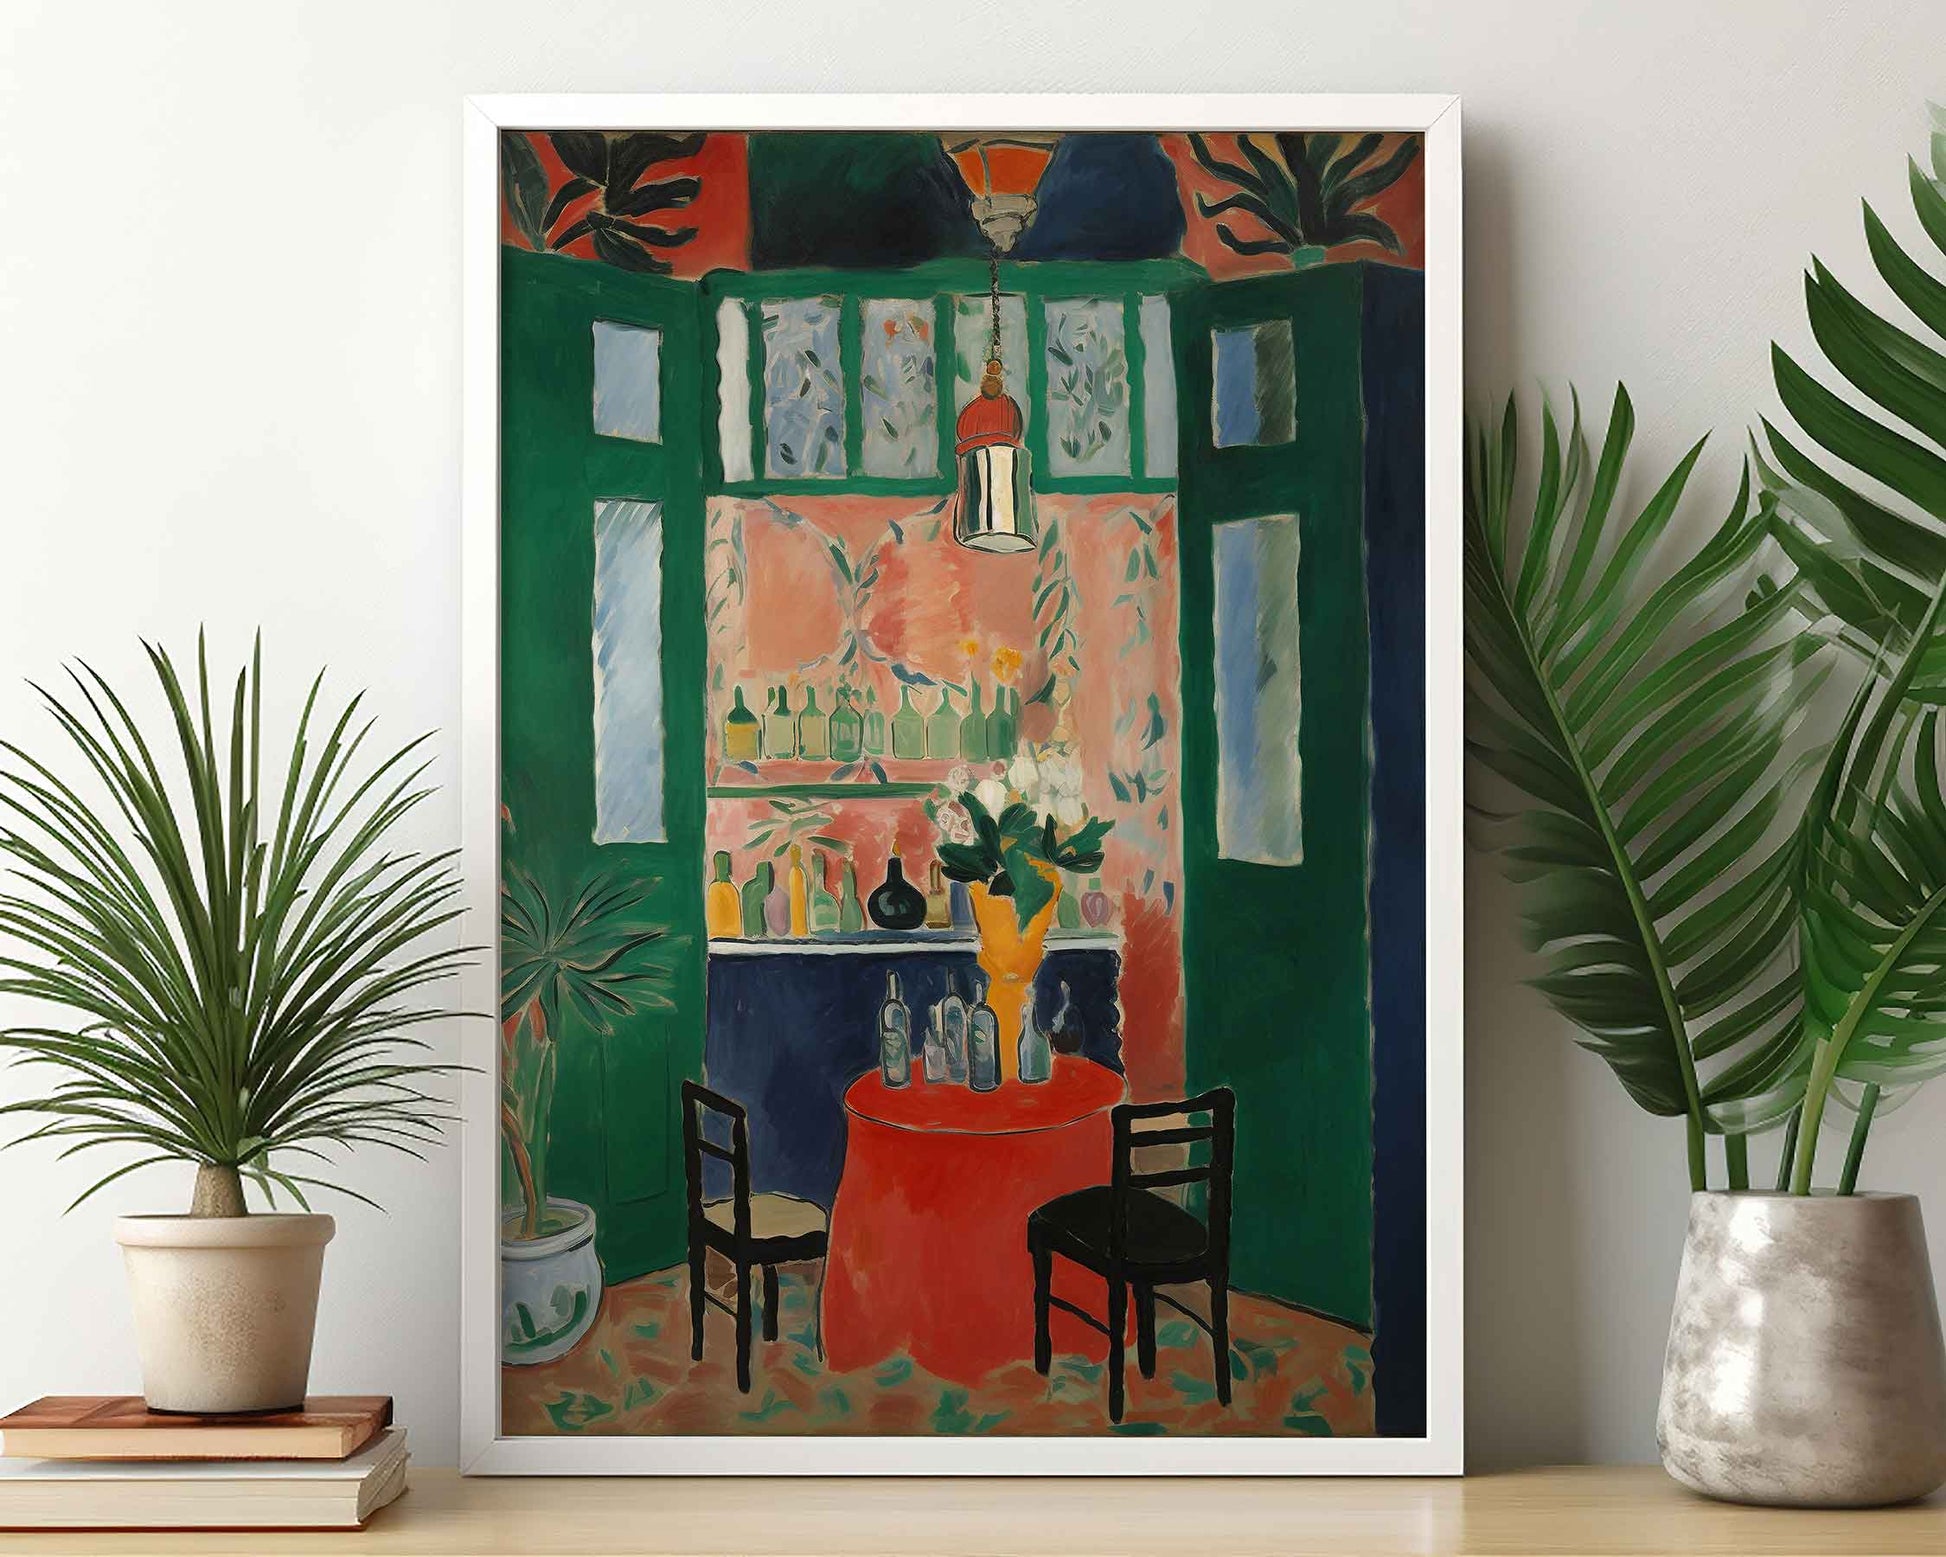 Framed Image of Matisse Style Wall Art Poster Prints Garden & Window Oil Paintings